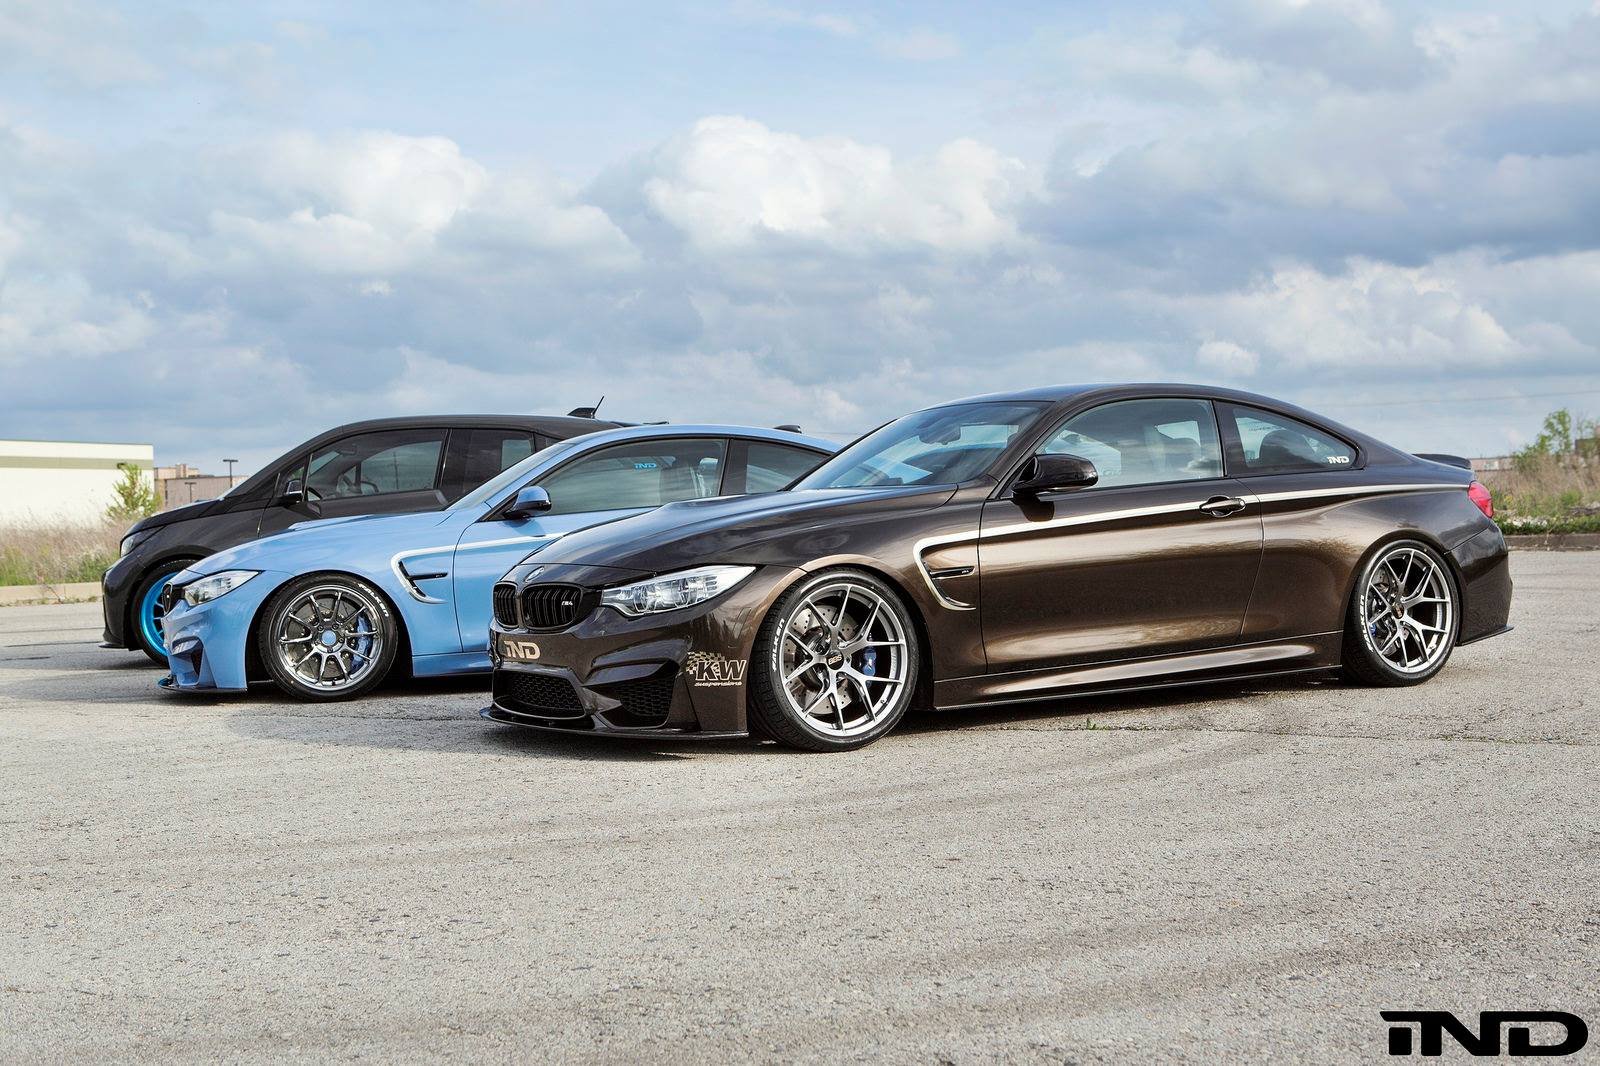 ind, Brown, Bmw m4, Coupe, Cars, Modified Wallpaper